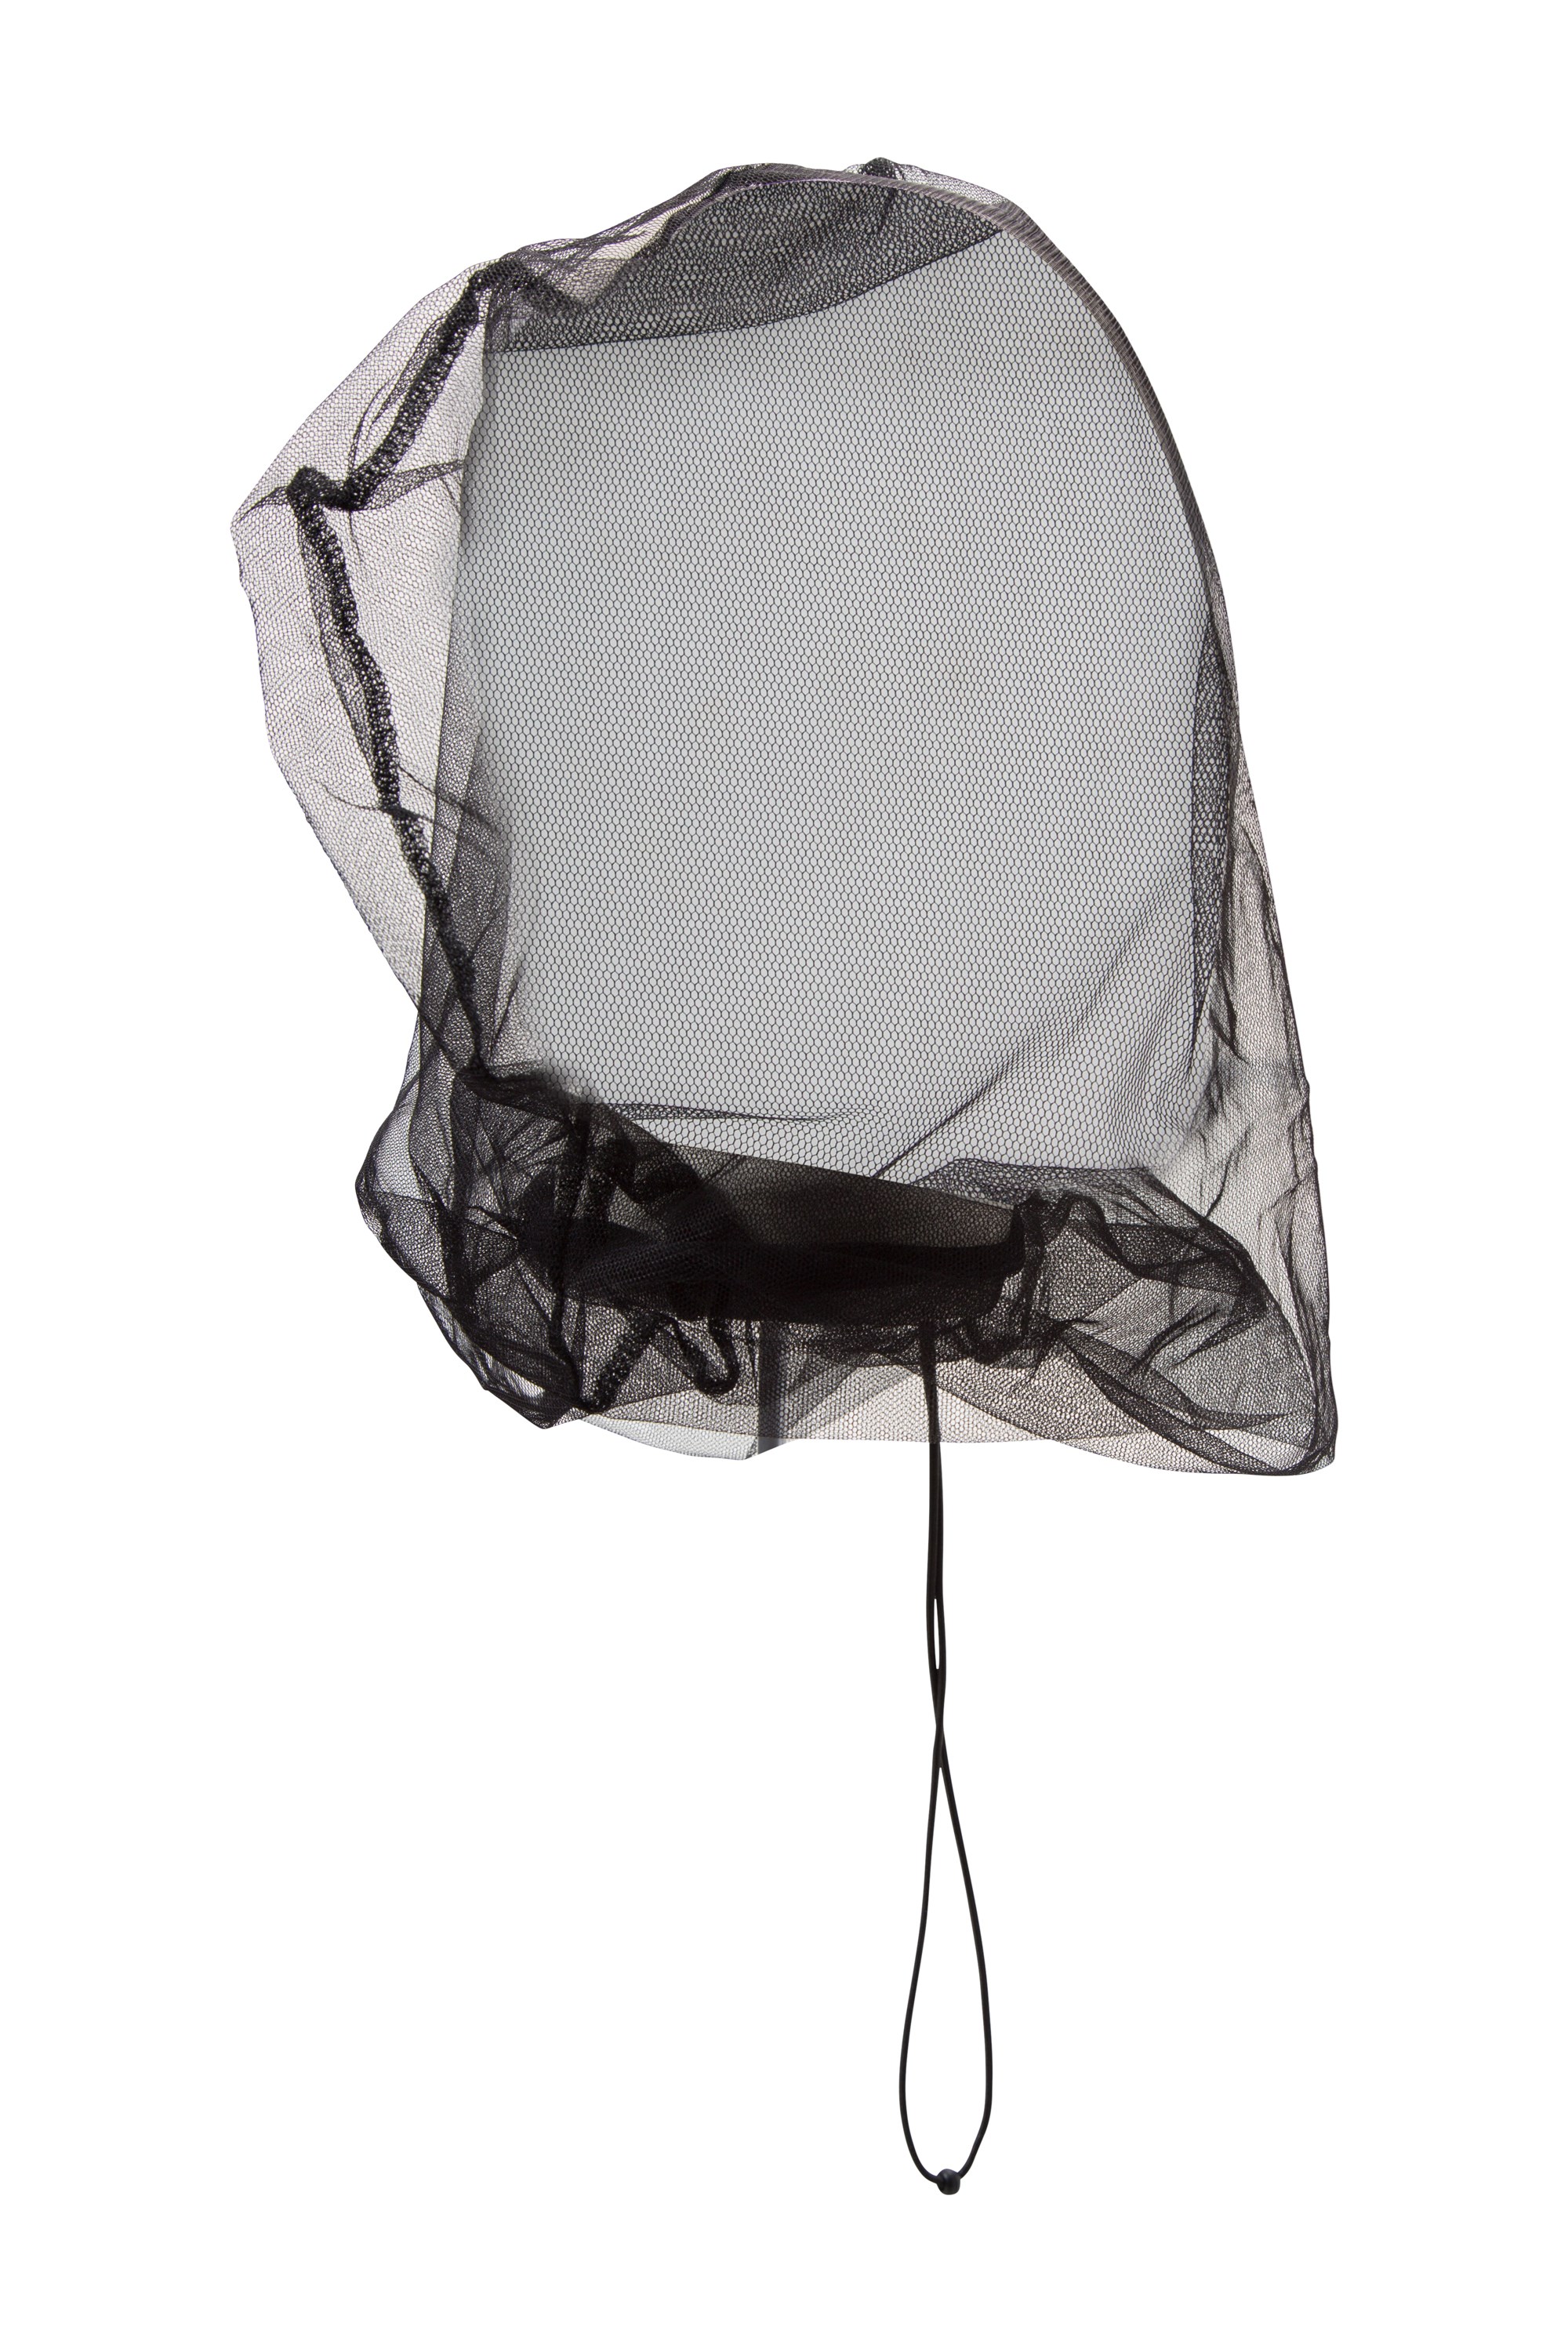 PP OPOUNT 6 Pack Grey Mosquito Head Net Protecting from Mosquito and Other Flies in Outdoor Activities with 6 Pack Storage Bag 